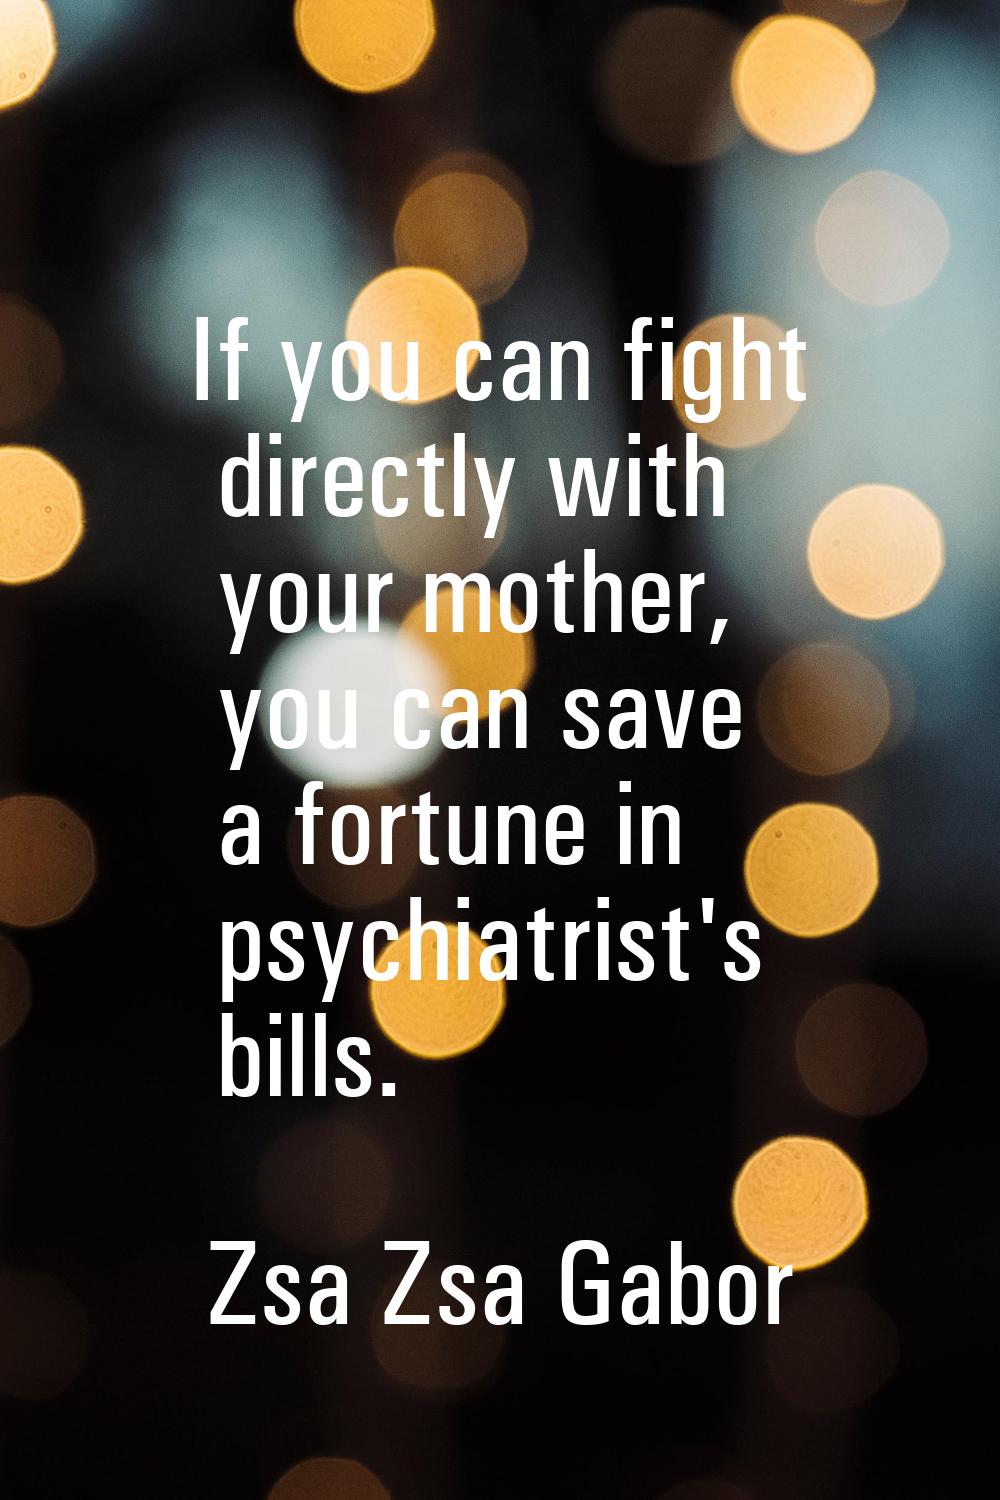 If you can fight directly with your mother, you can save a fortune in psychiatrist's bills.